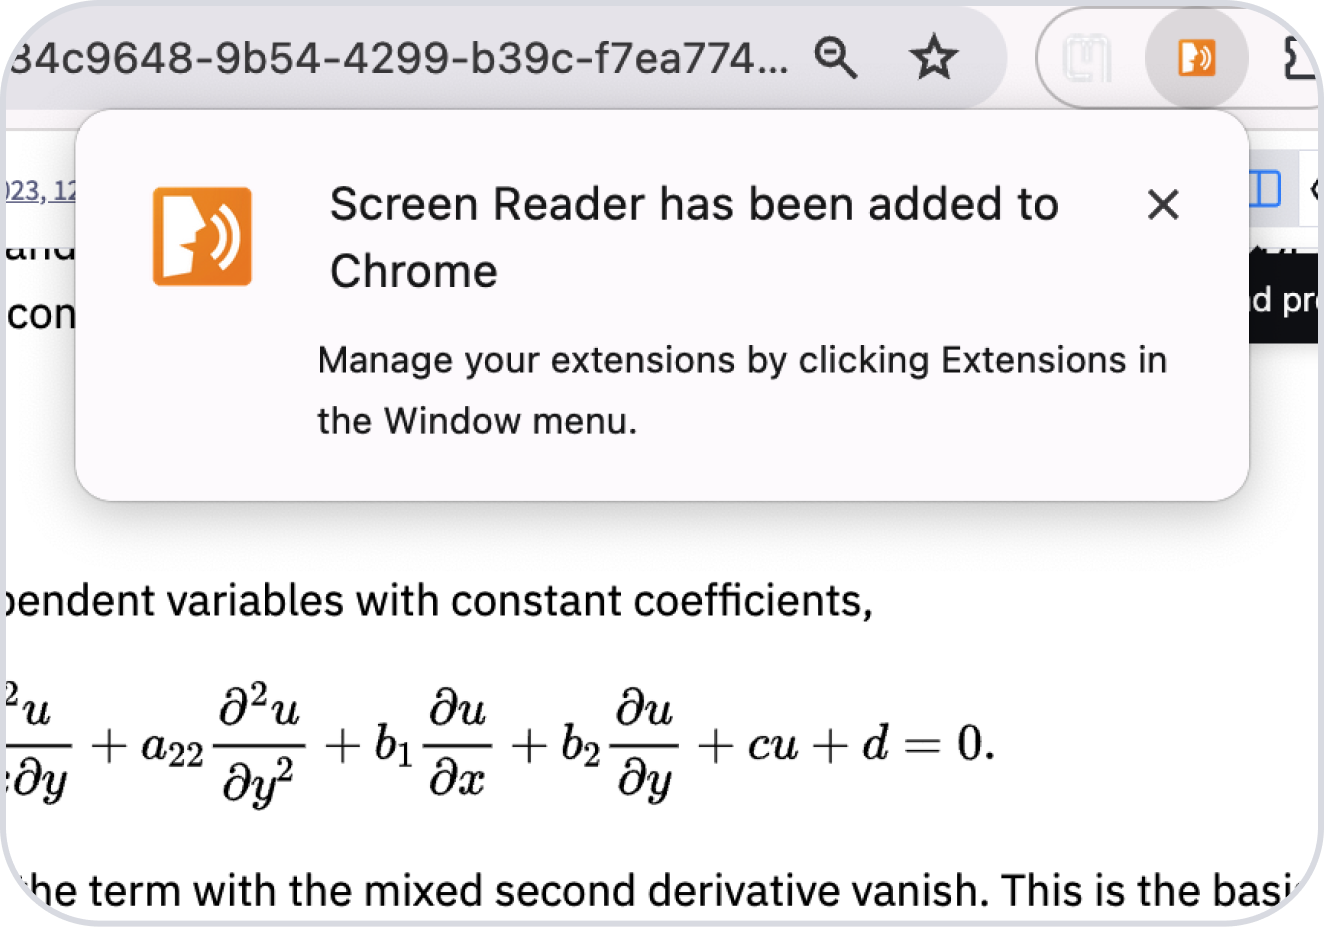 Enable screen reader